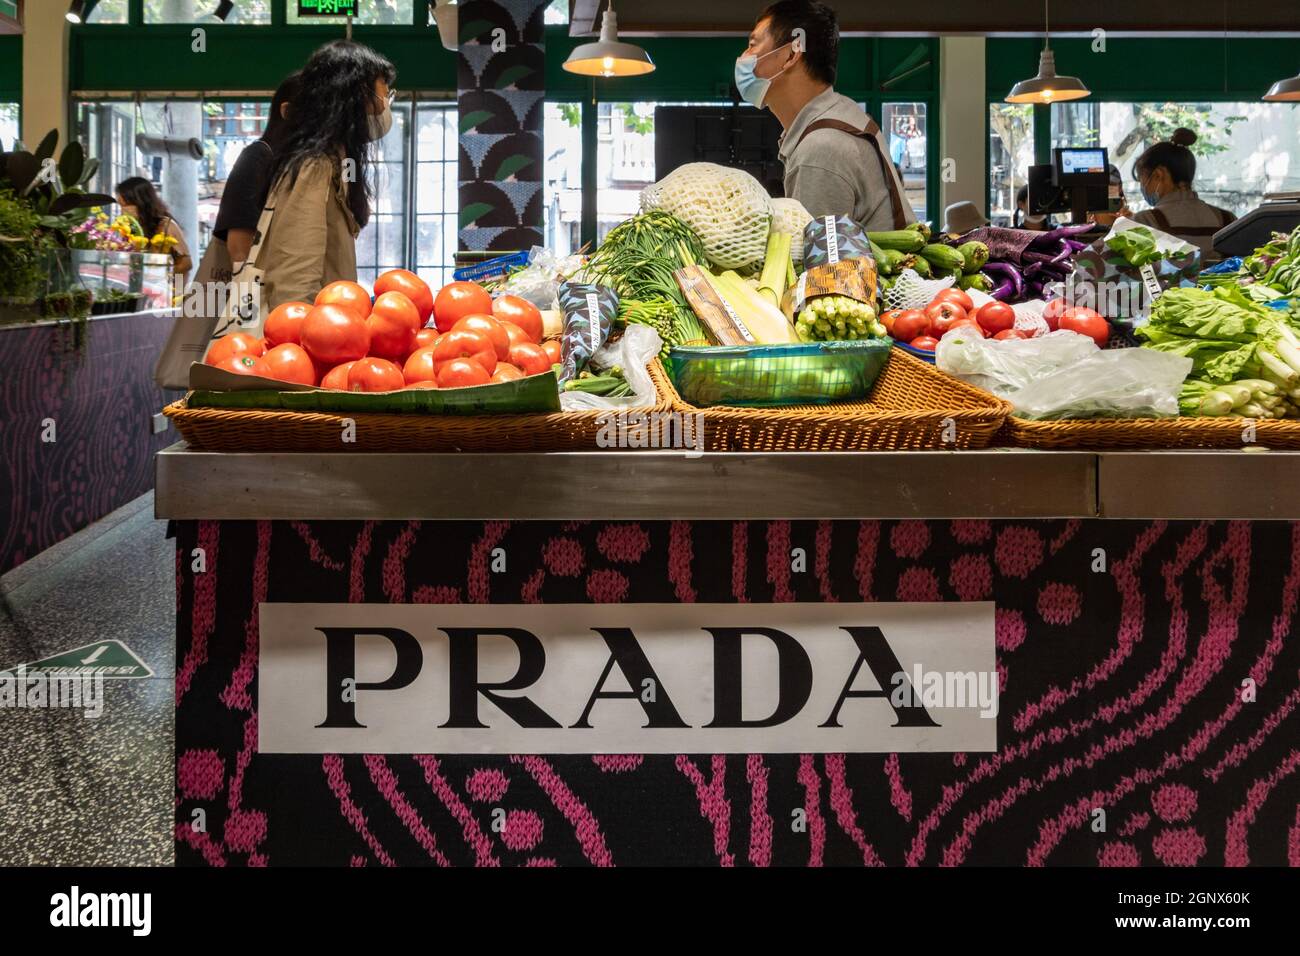 SHANGHAI, CHINA - SEPTEMBER 28, 2021 - Prada vegetable market jointly  launched by Prada and "Wuzhong market", September 28, 2021, Shanghai,  China. There are striking Prada words on the market appearance and